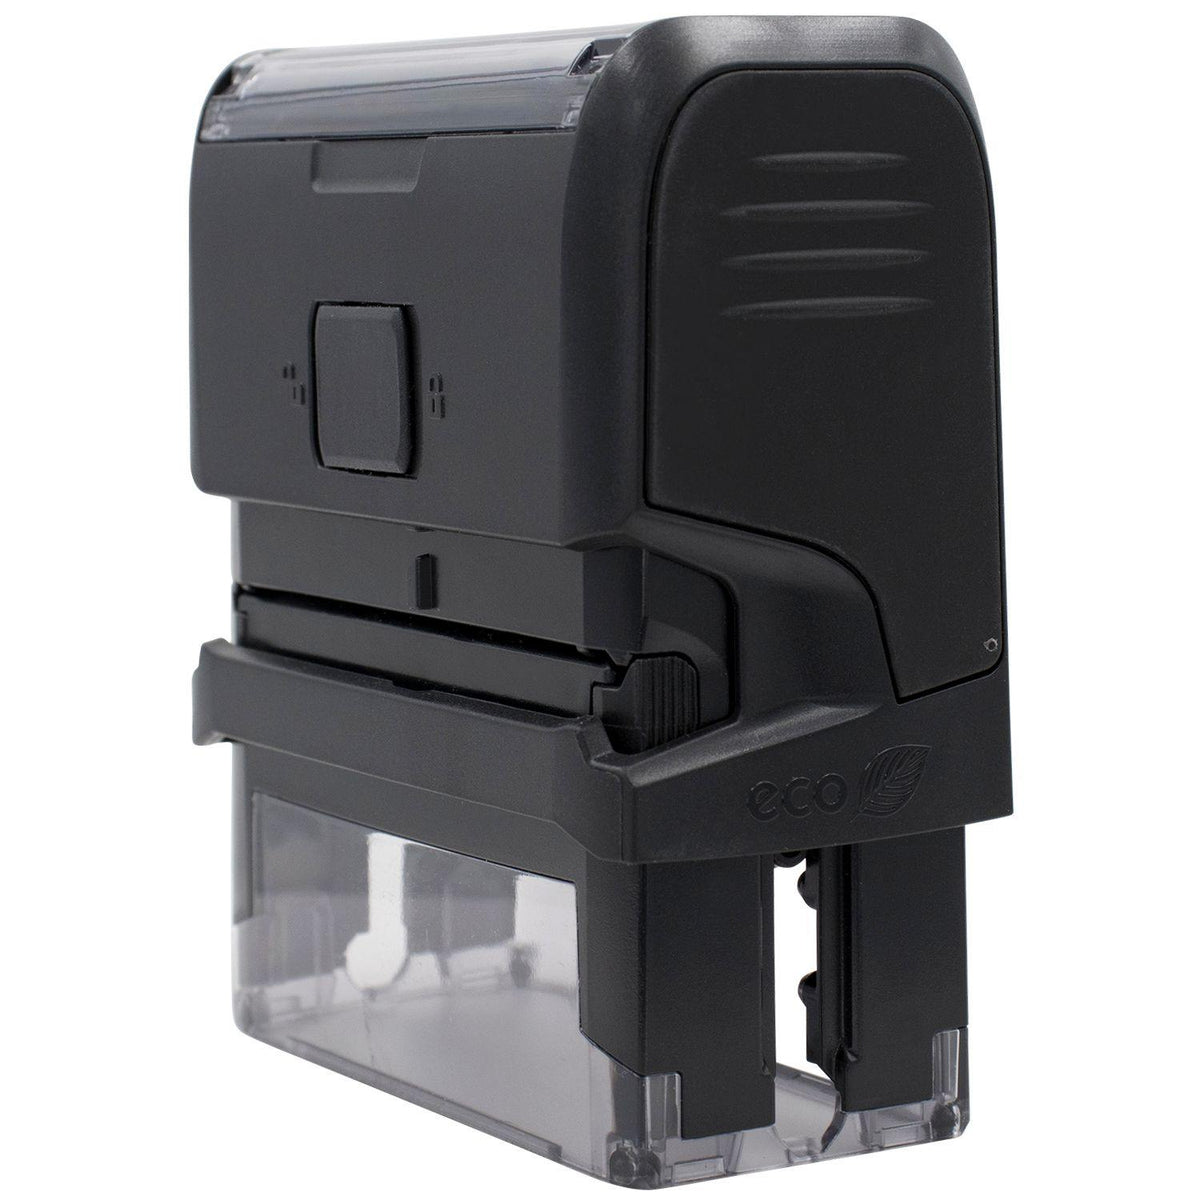 Self-Inking Bold Banco Stamp - Engineer Seal Stamps - Brand_Trodat, Impression Size_Small, Stamp Type_Self-Inking Stamp, Type of Use_Accounting, Type of Use_Finance